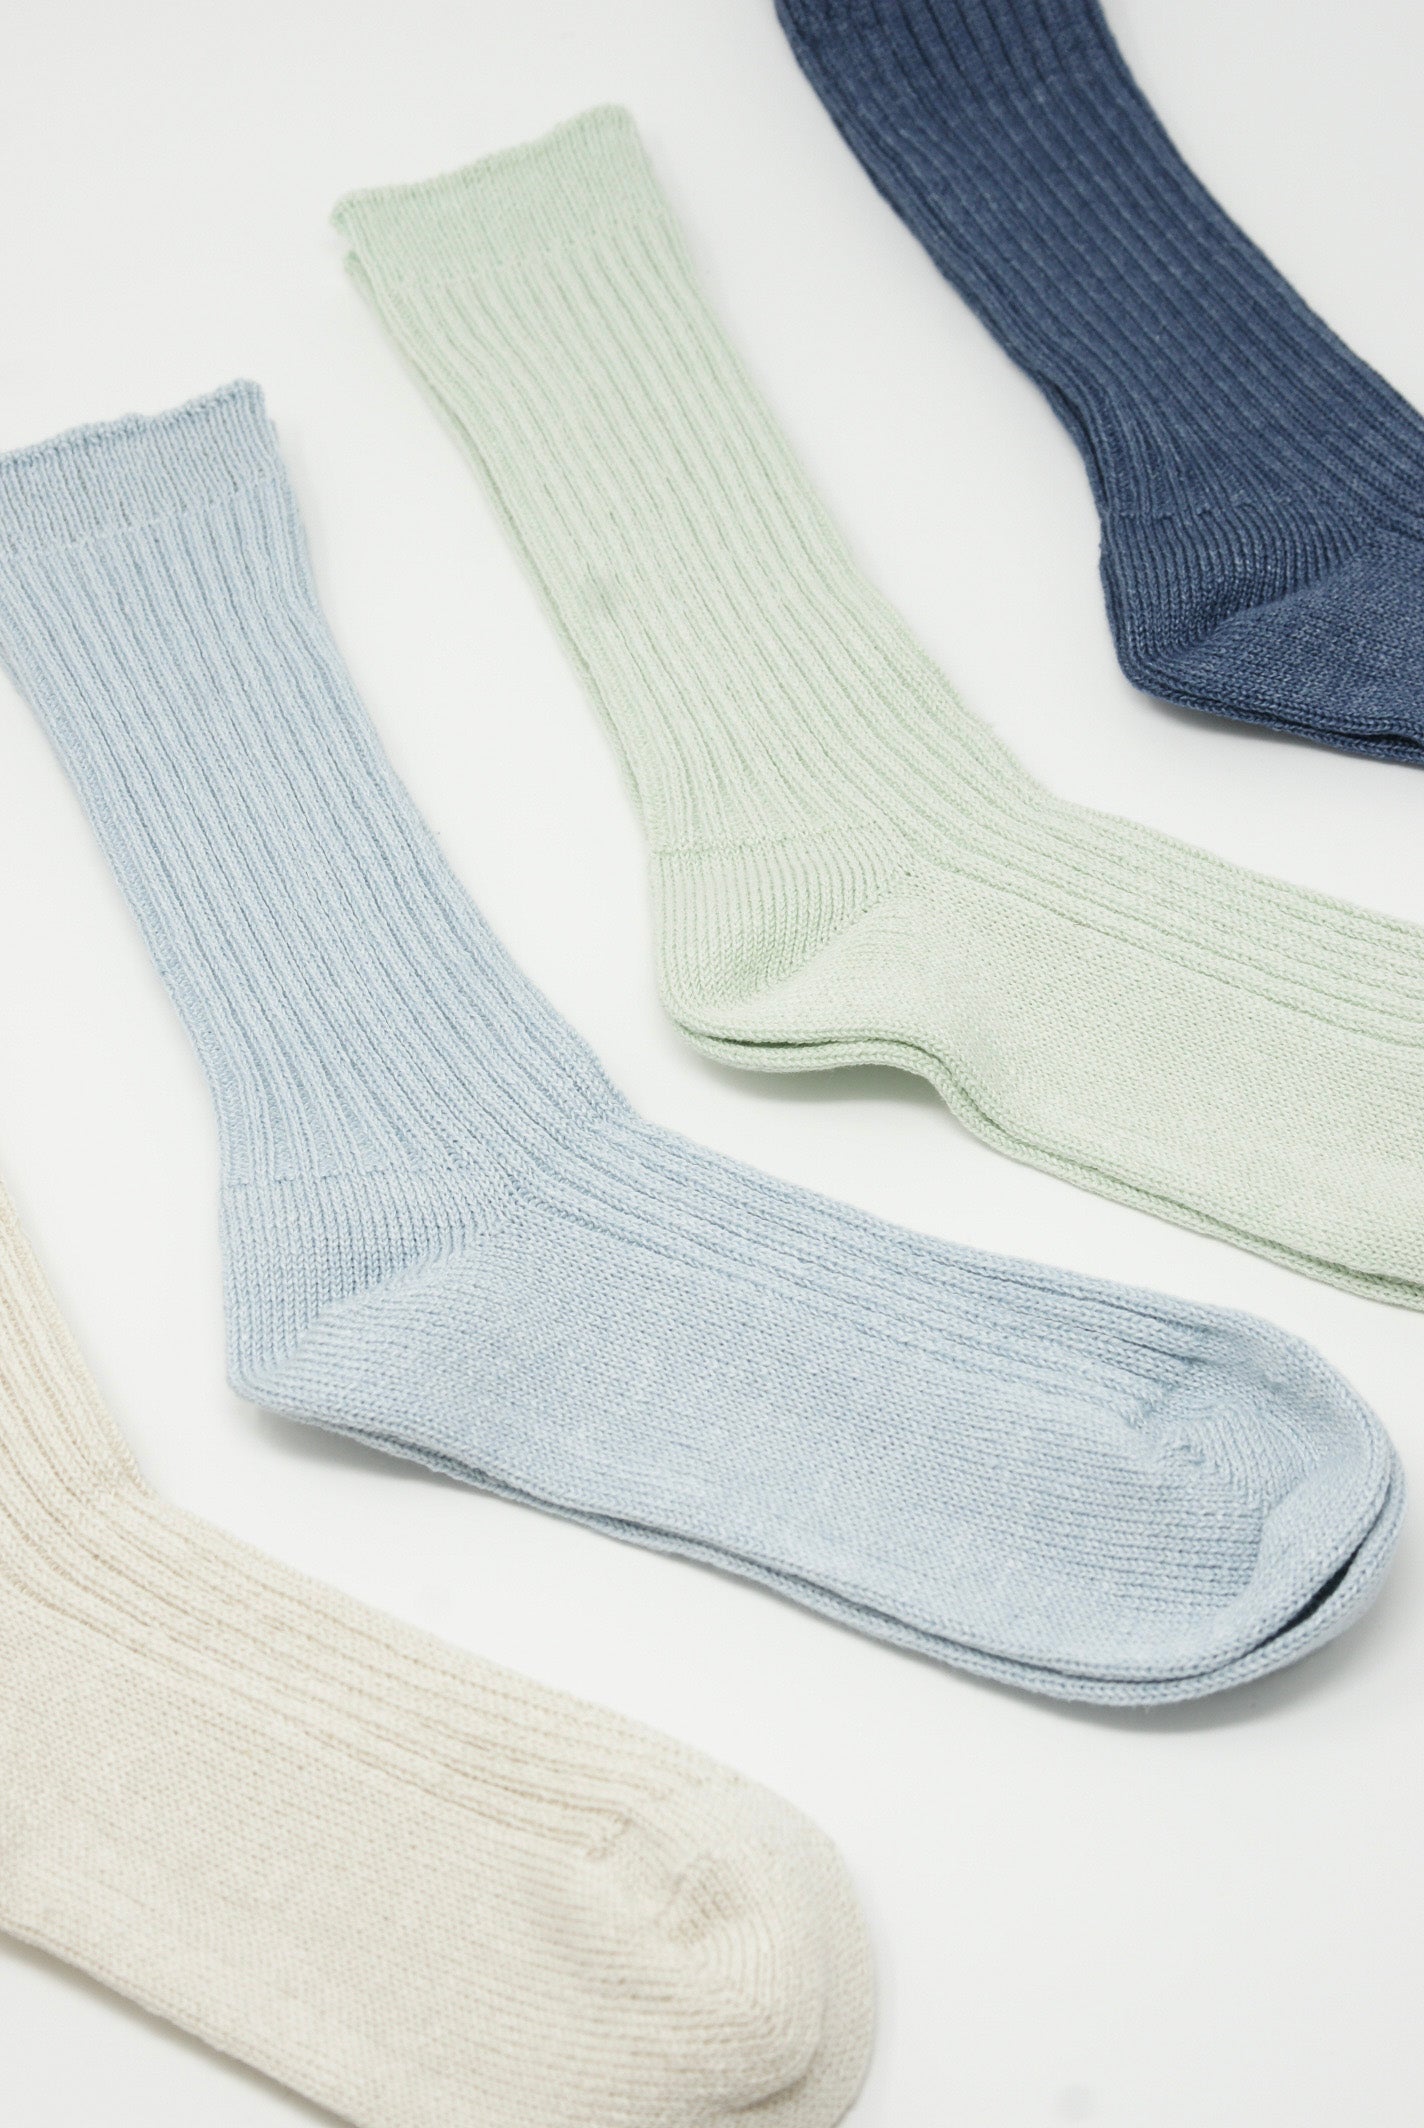 Four pairs of Ichi Antiquités Linen Rib Socks in Blue, made with a linen blend, placed on a white surface.